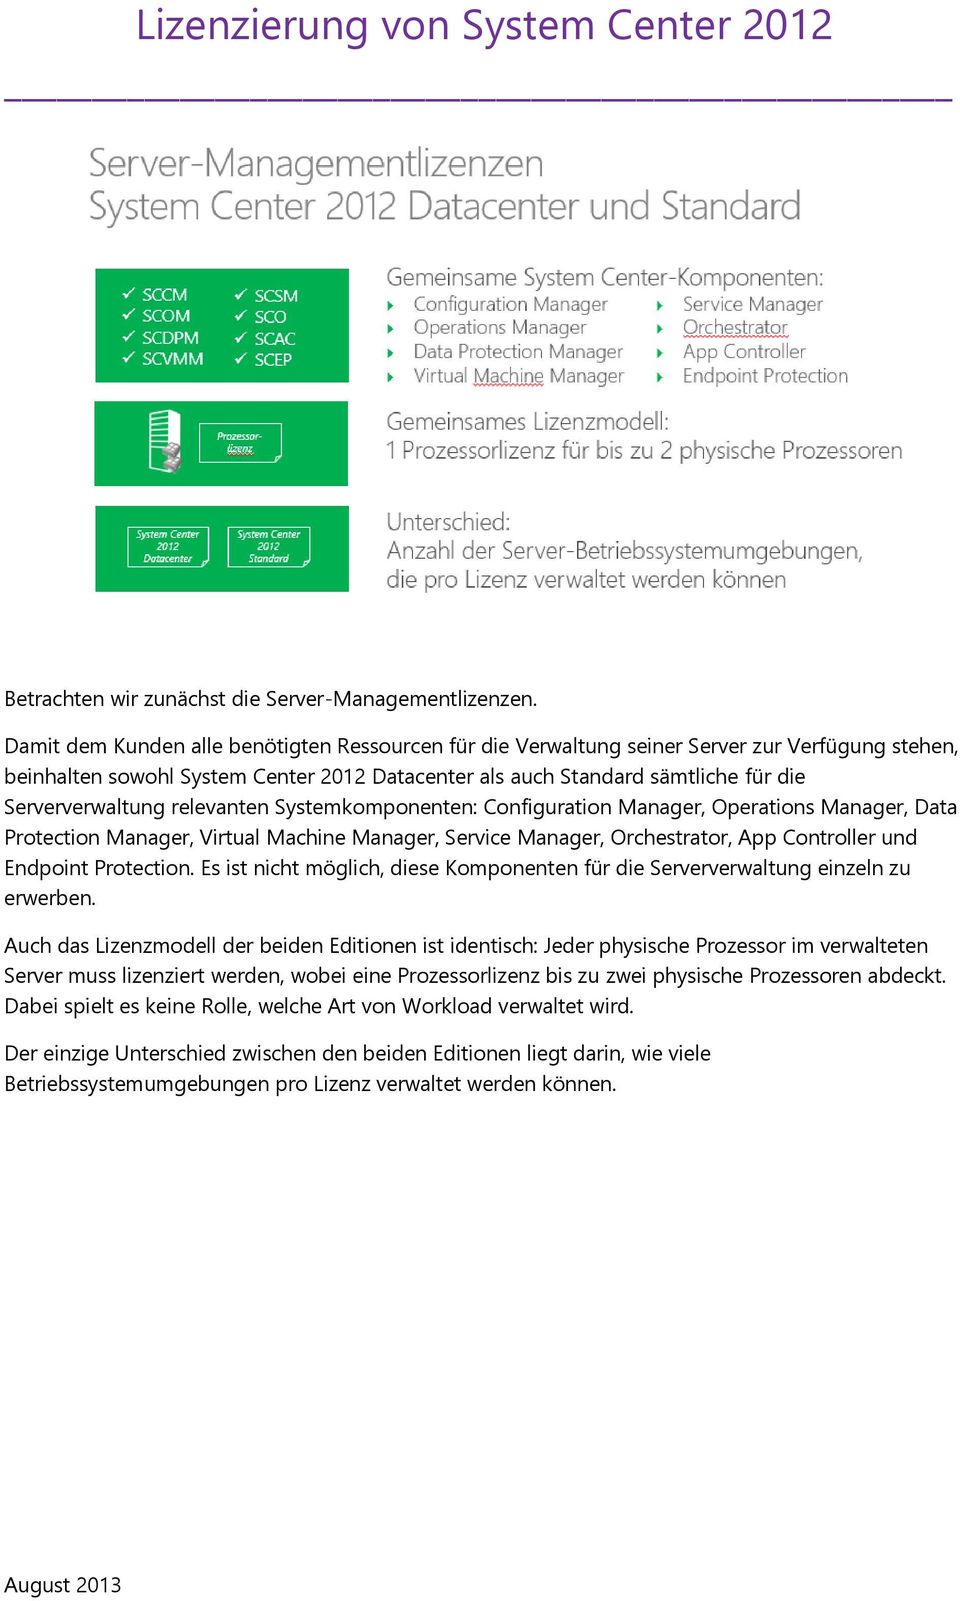 relevanten Systemkomponenten: Configuration Manager, Operations Manager, Data Protection Manager, Virtual Machine Manager, Service Manager, Orchestrator, App Controller und Endpoint Protection.